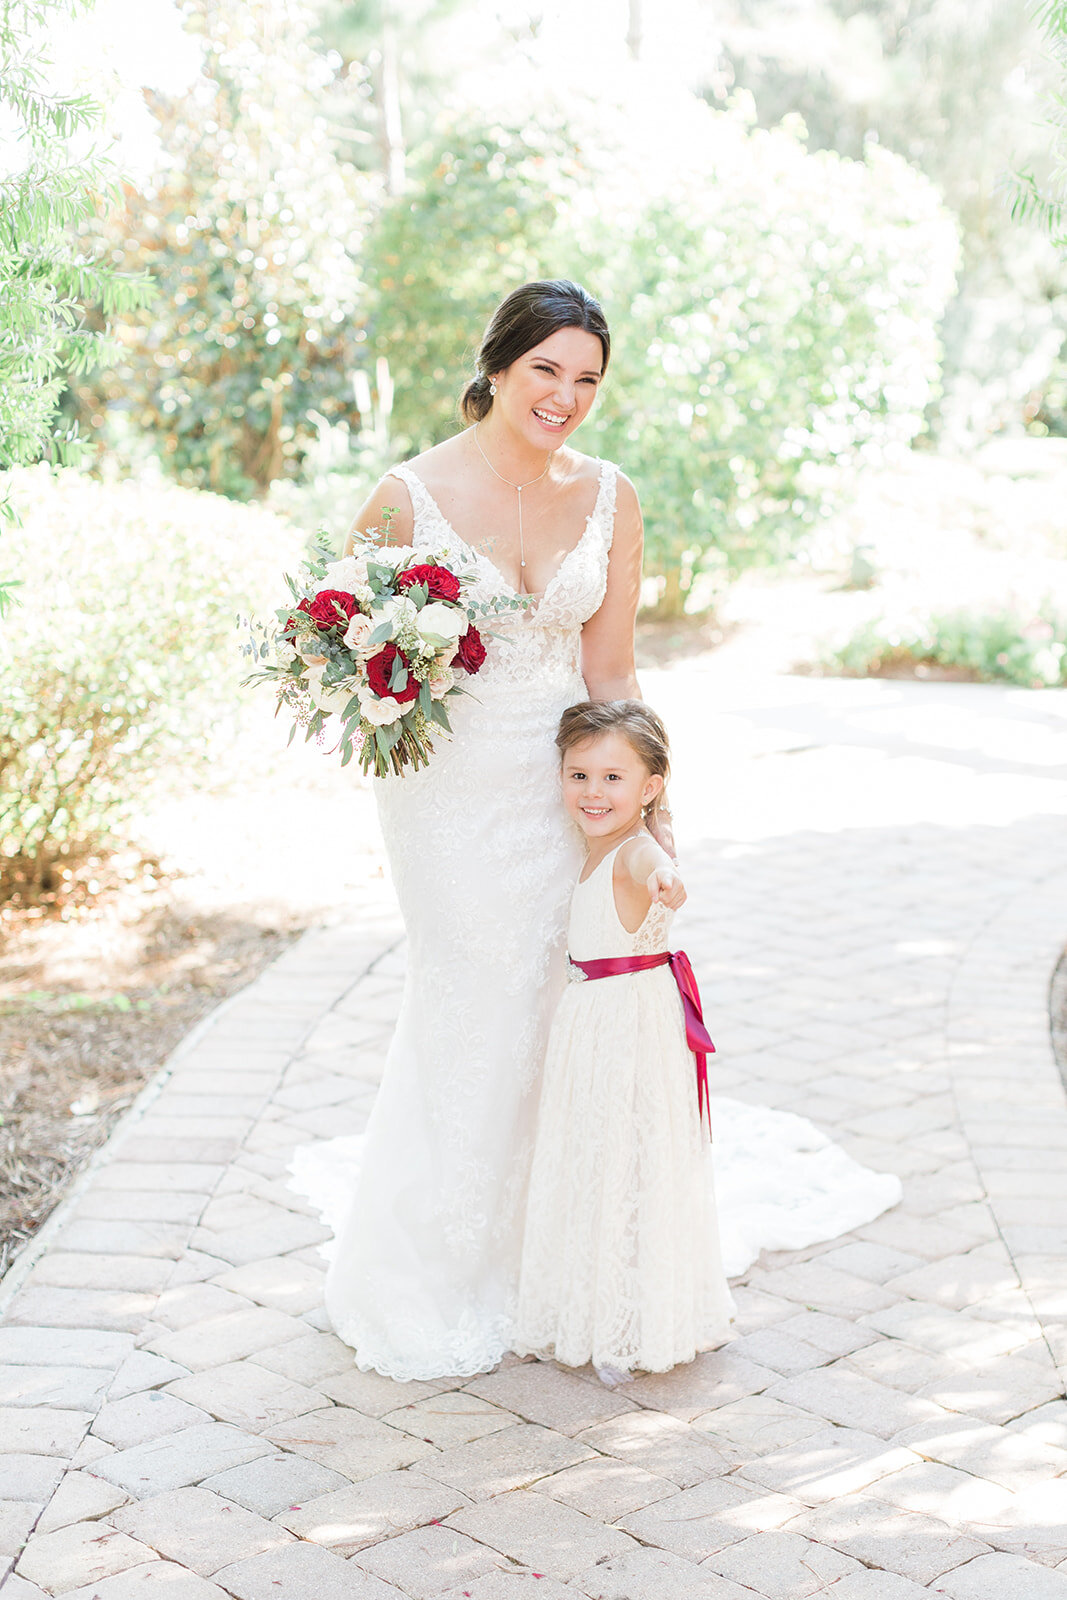 Bluegrass Chic - The Hendricks Photography at Royal Crest Room Bride with her flower girl Burgundy and White Wedding